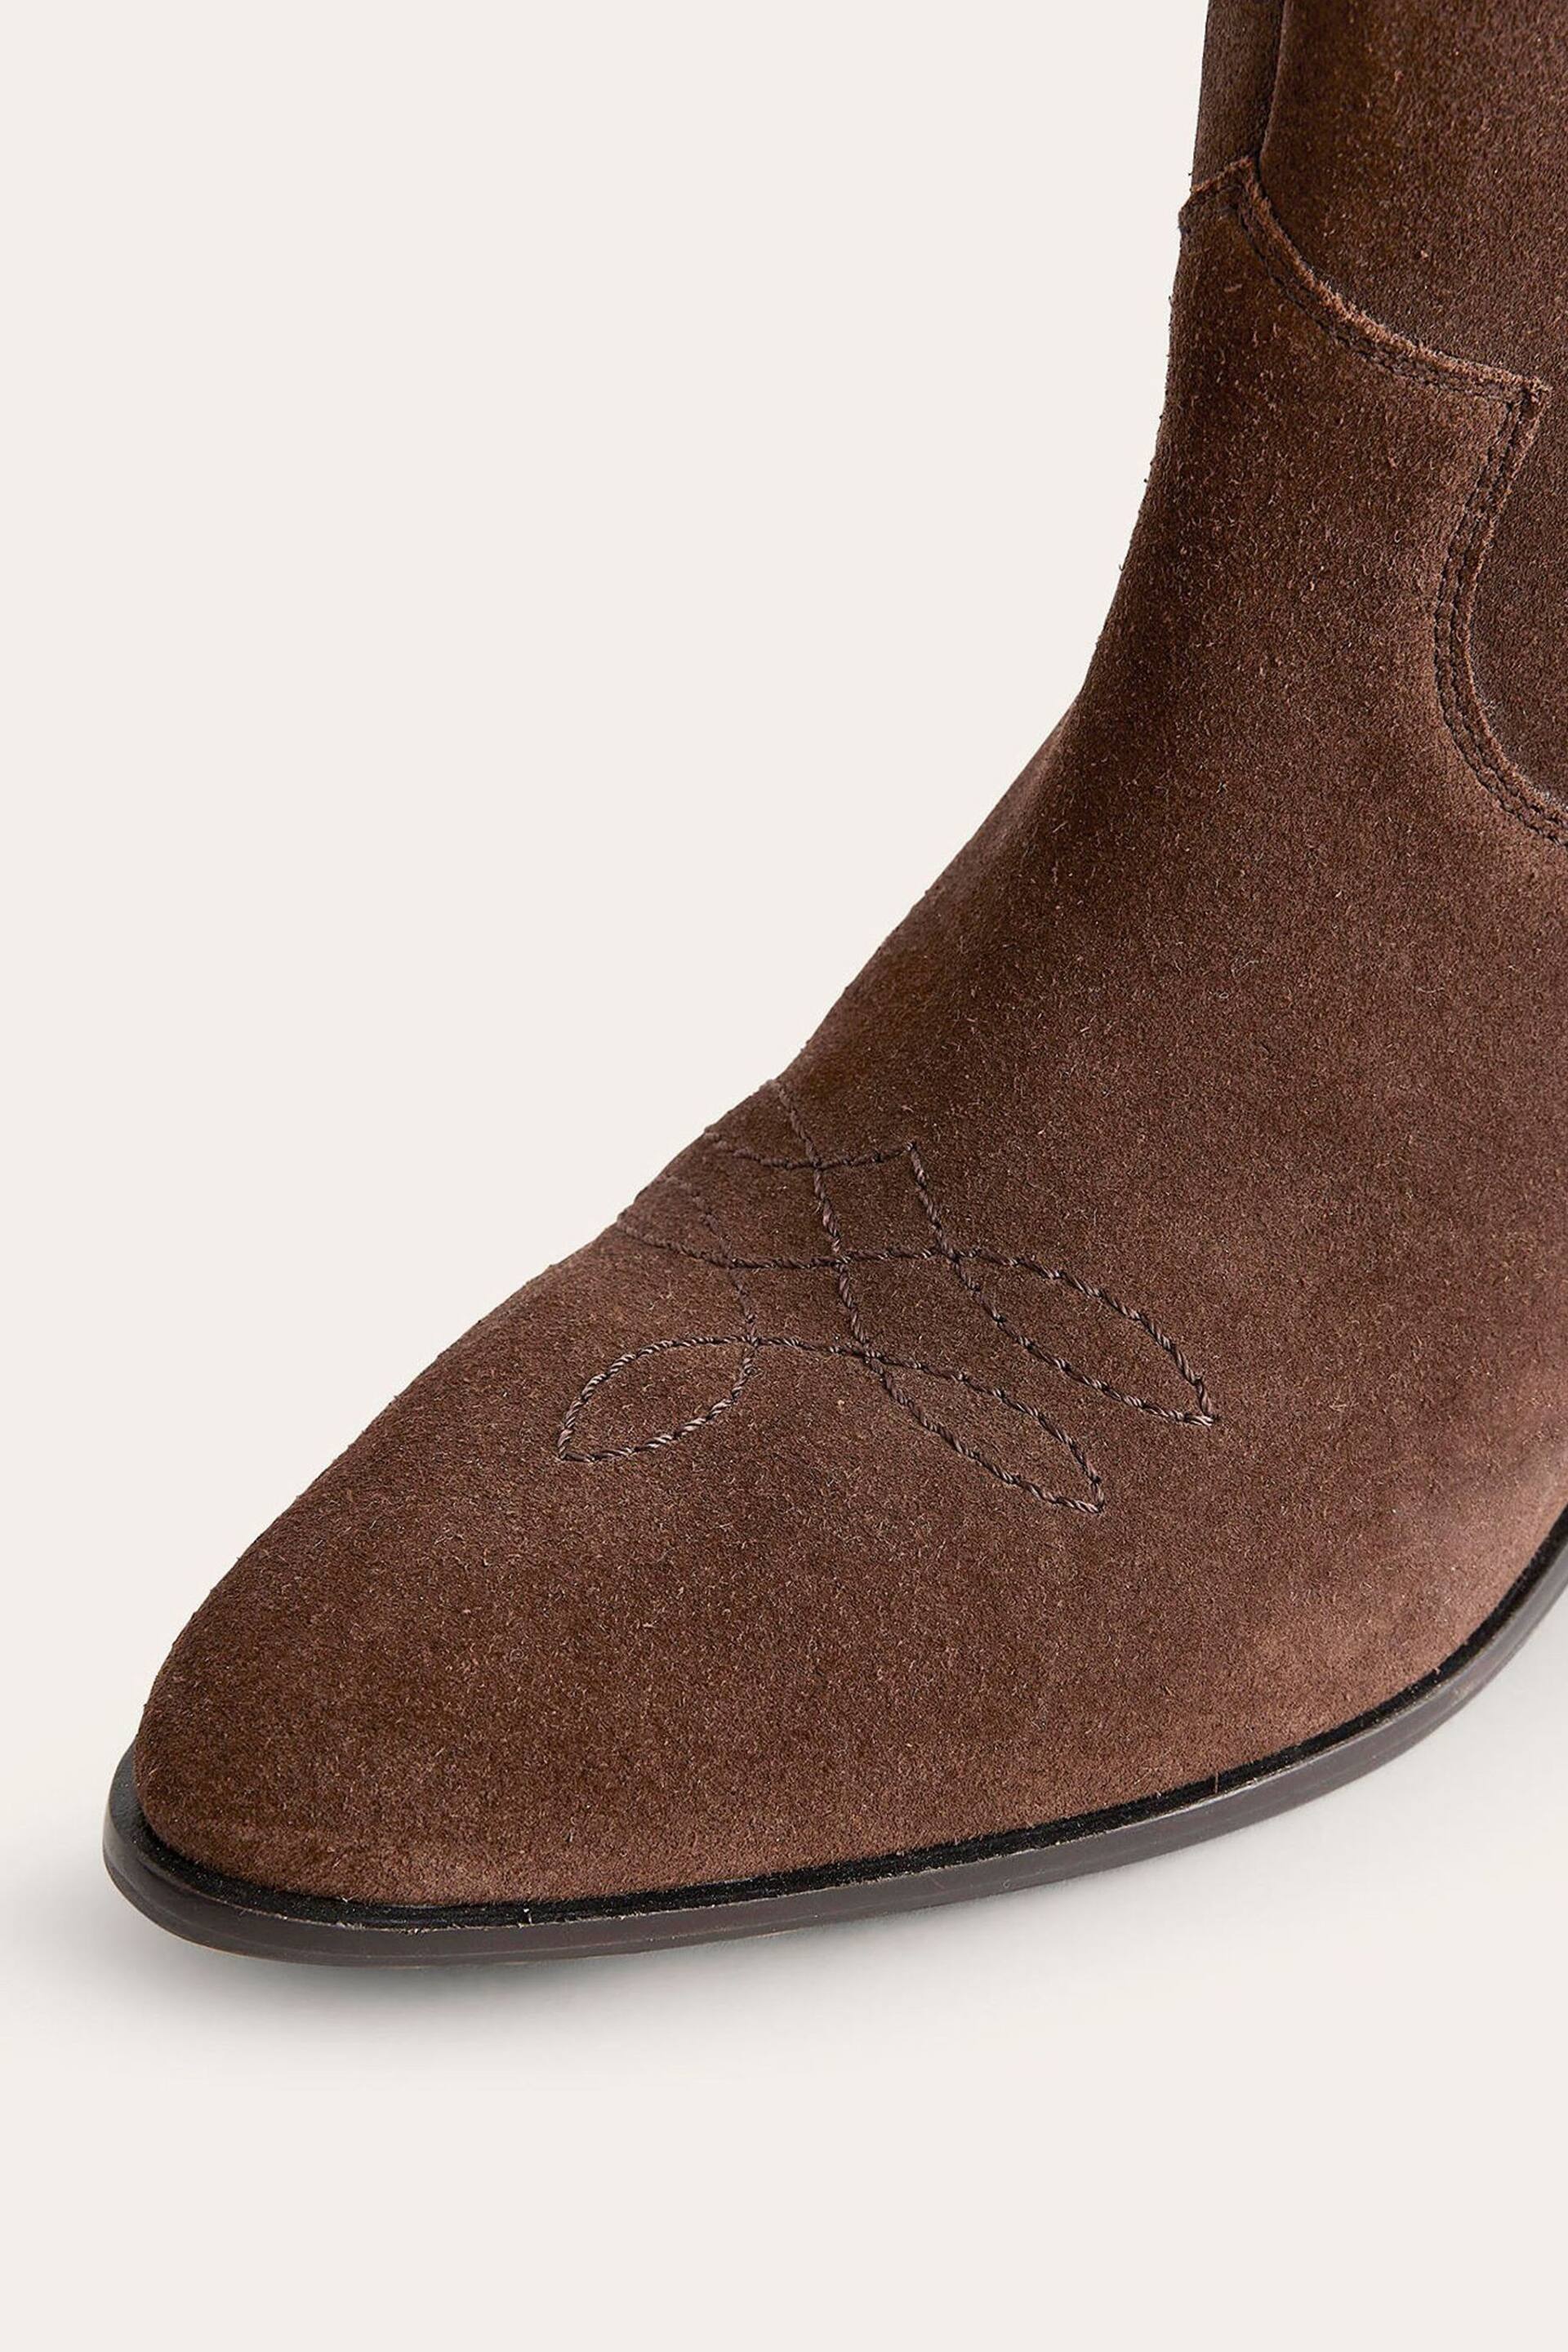 Boden Brown Western Ankle Boots - Image 4 of 5